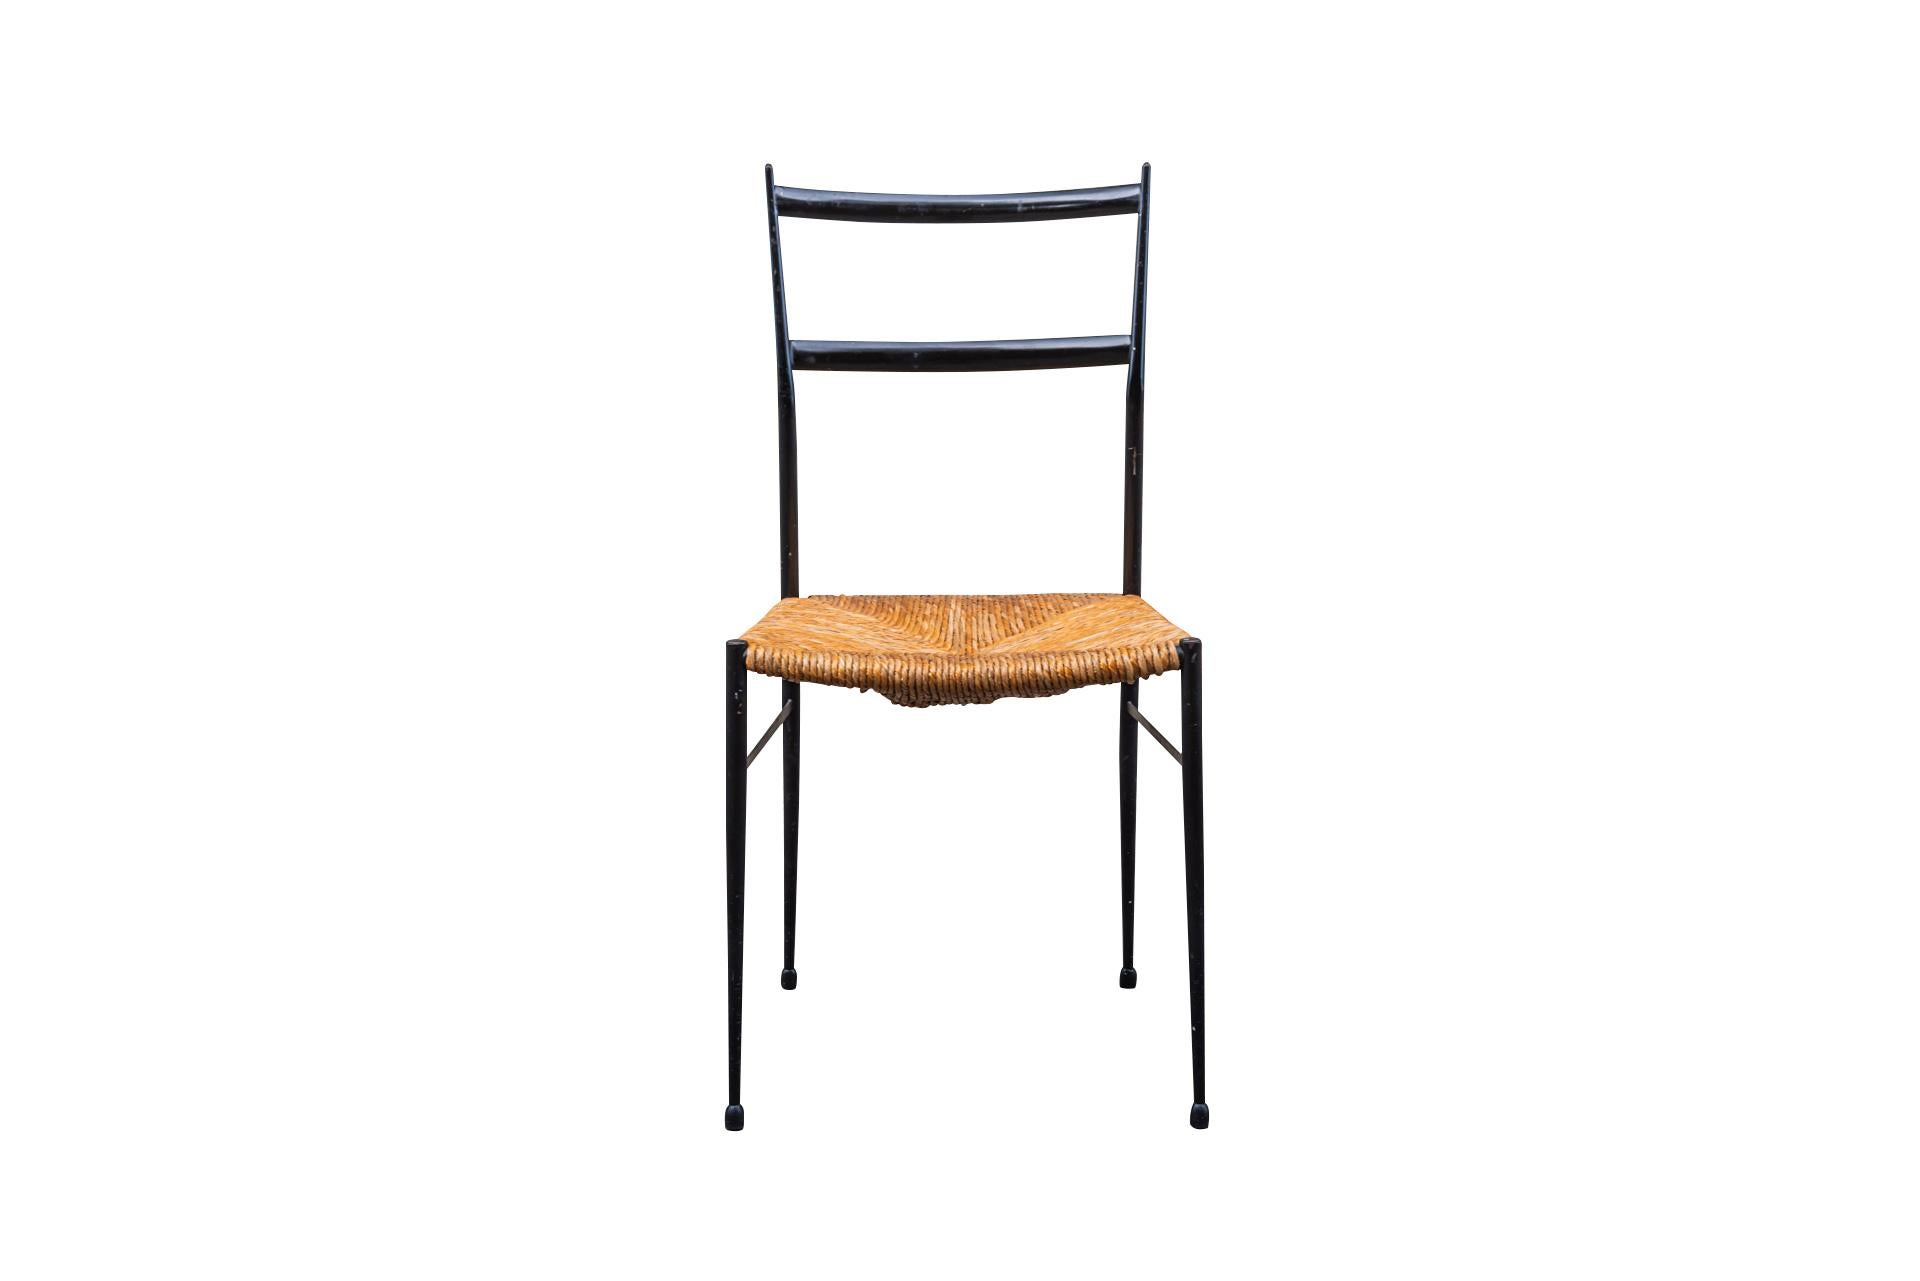 Gio Ponti (1891-1979), Pair of Superleggera model chairs,
Black lacquered iron structure and straw seat,
Slightly inclined backrest, rubber ball feet,
circa 1960, Italy.

Measures : Width 41 cm, Depth 42 cm, Height 84 cm.

Gio Ponti (November 18,